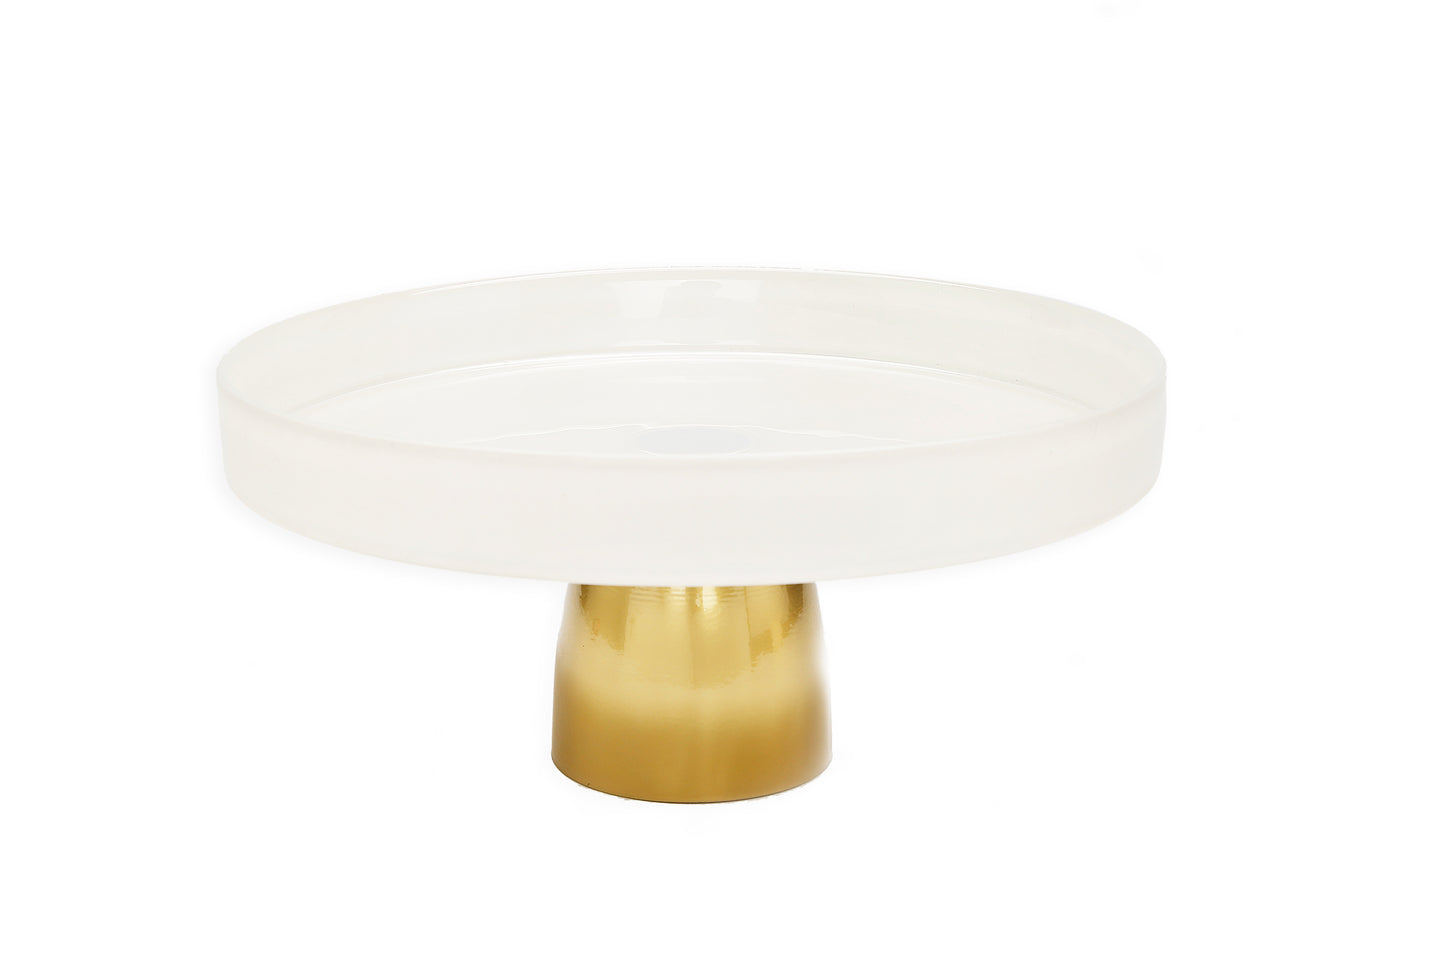 Small White Glass Cake Plate on Gold Stem